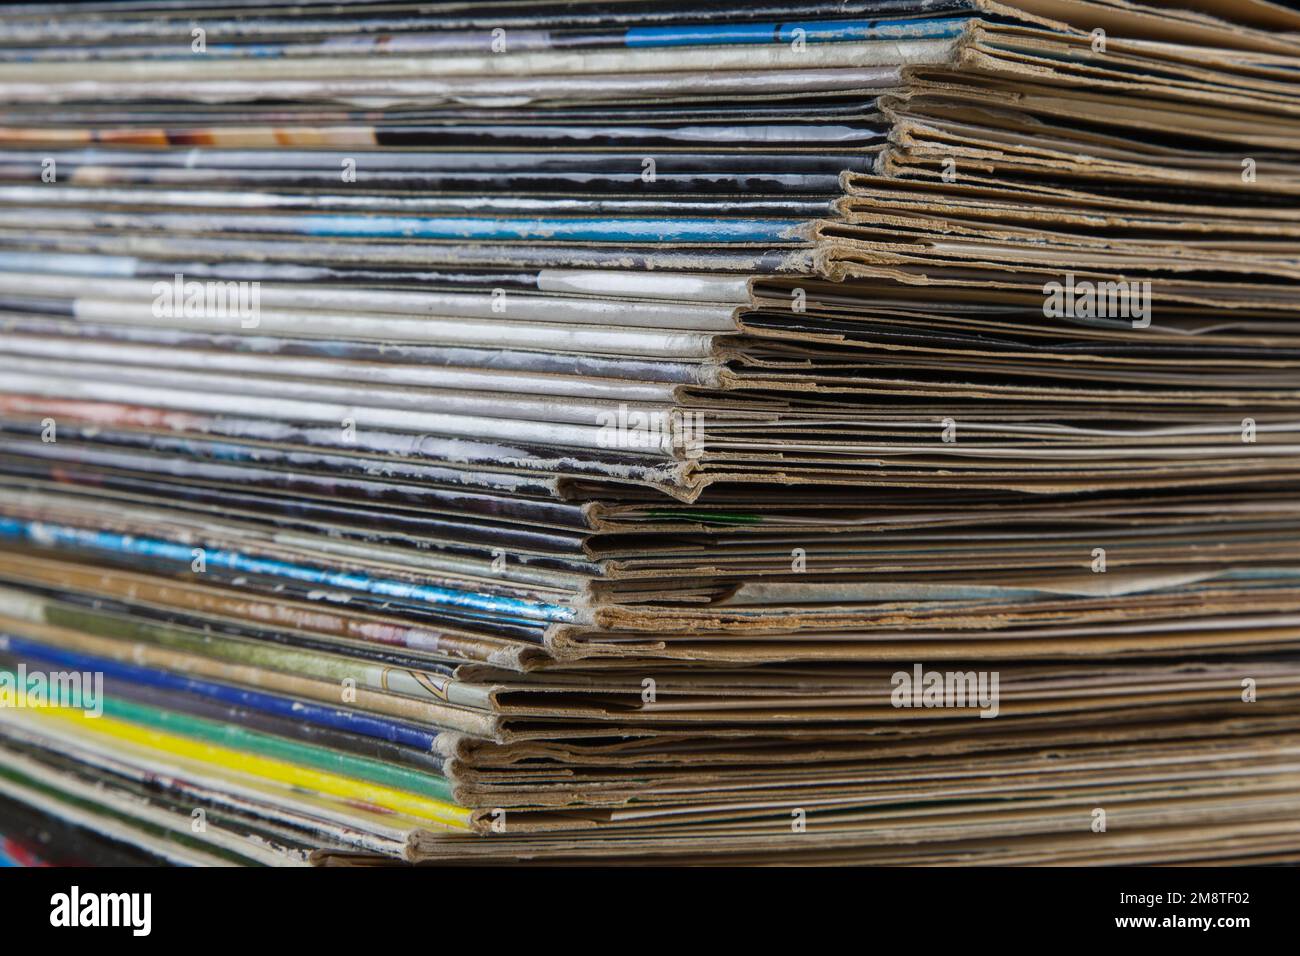 A stack of old LP covers from long-playing records, a piece of contemporary history in a world of streaming services. Stock Photo